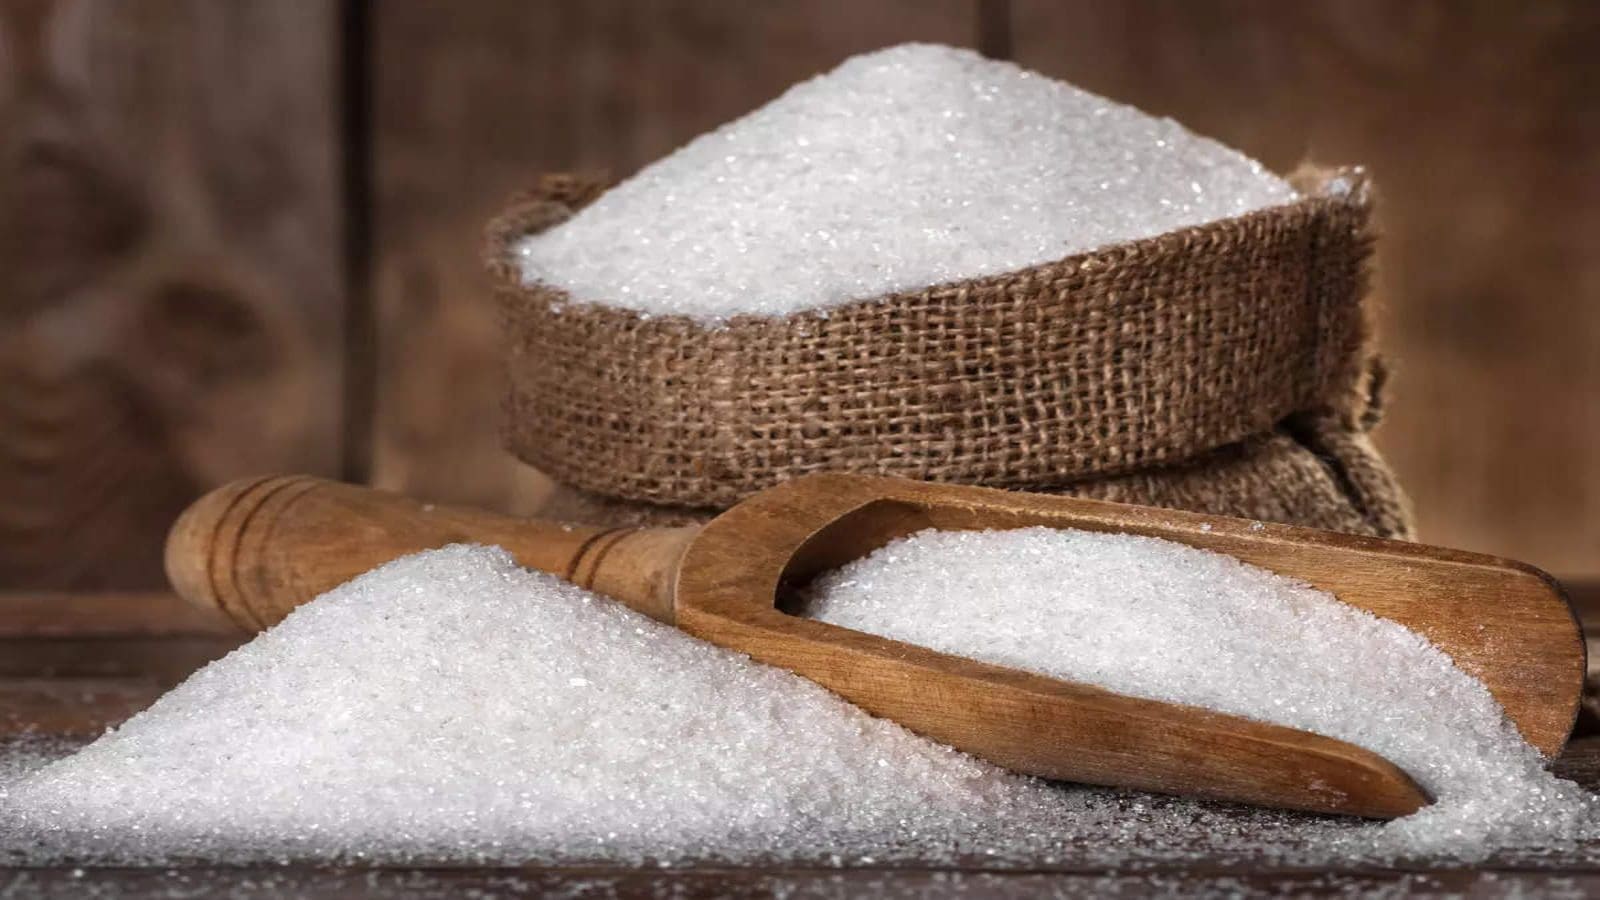 India’s government plans to restrict sugar exports to manage domestic prices